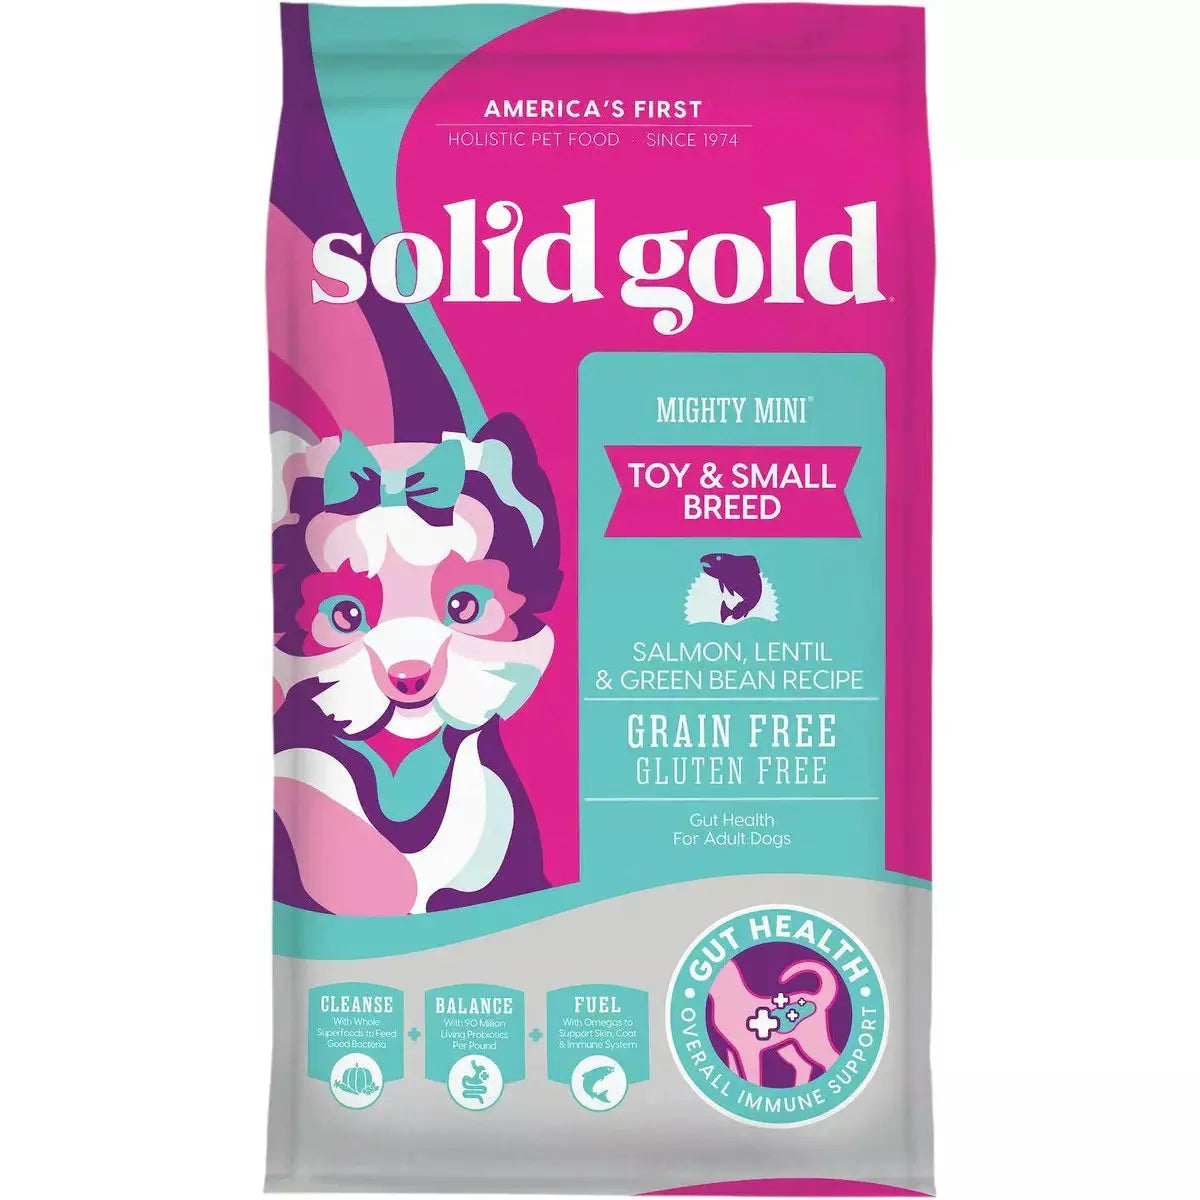 Solid Gold® Mighty Mini Grain Free Salmon, Lentil & Green Bean Recipe Weight Control Dog Food Solid Gold